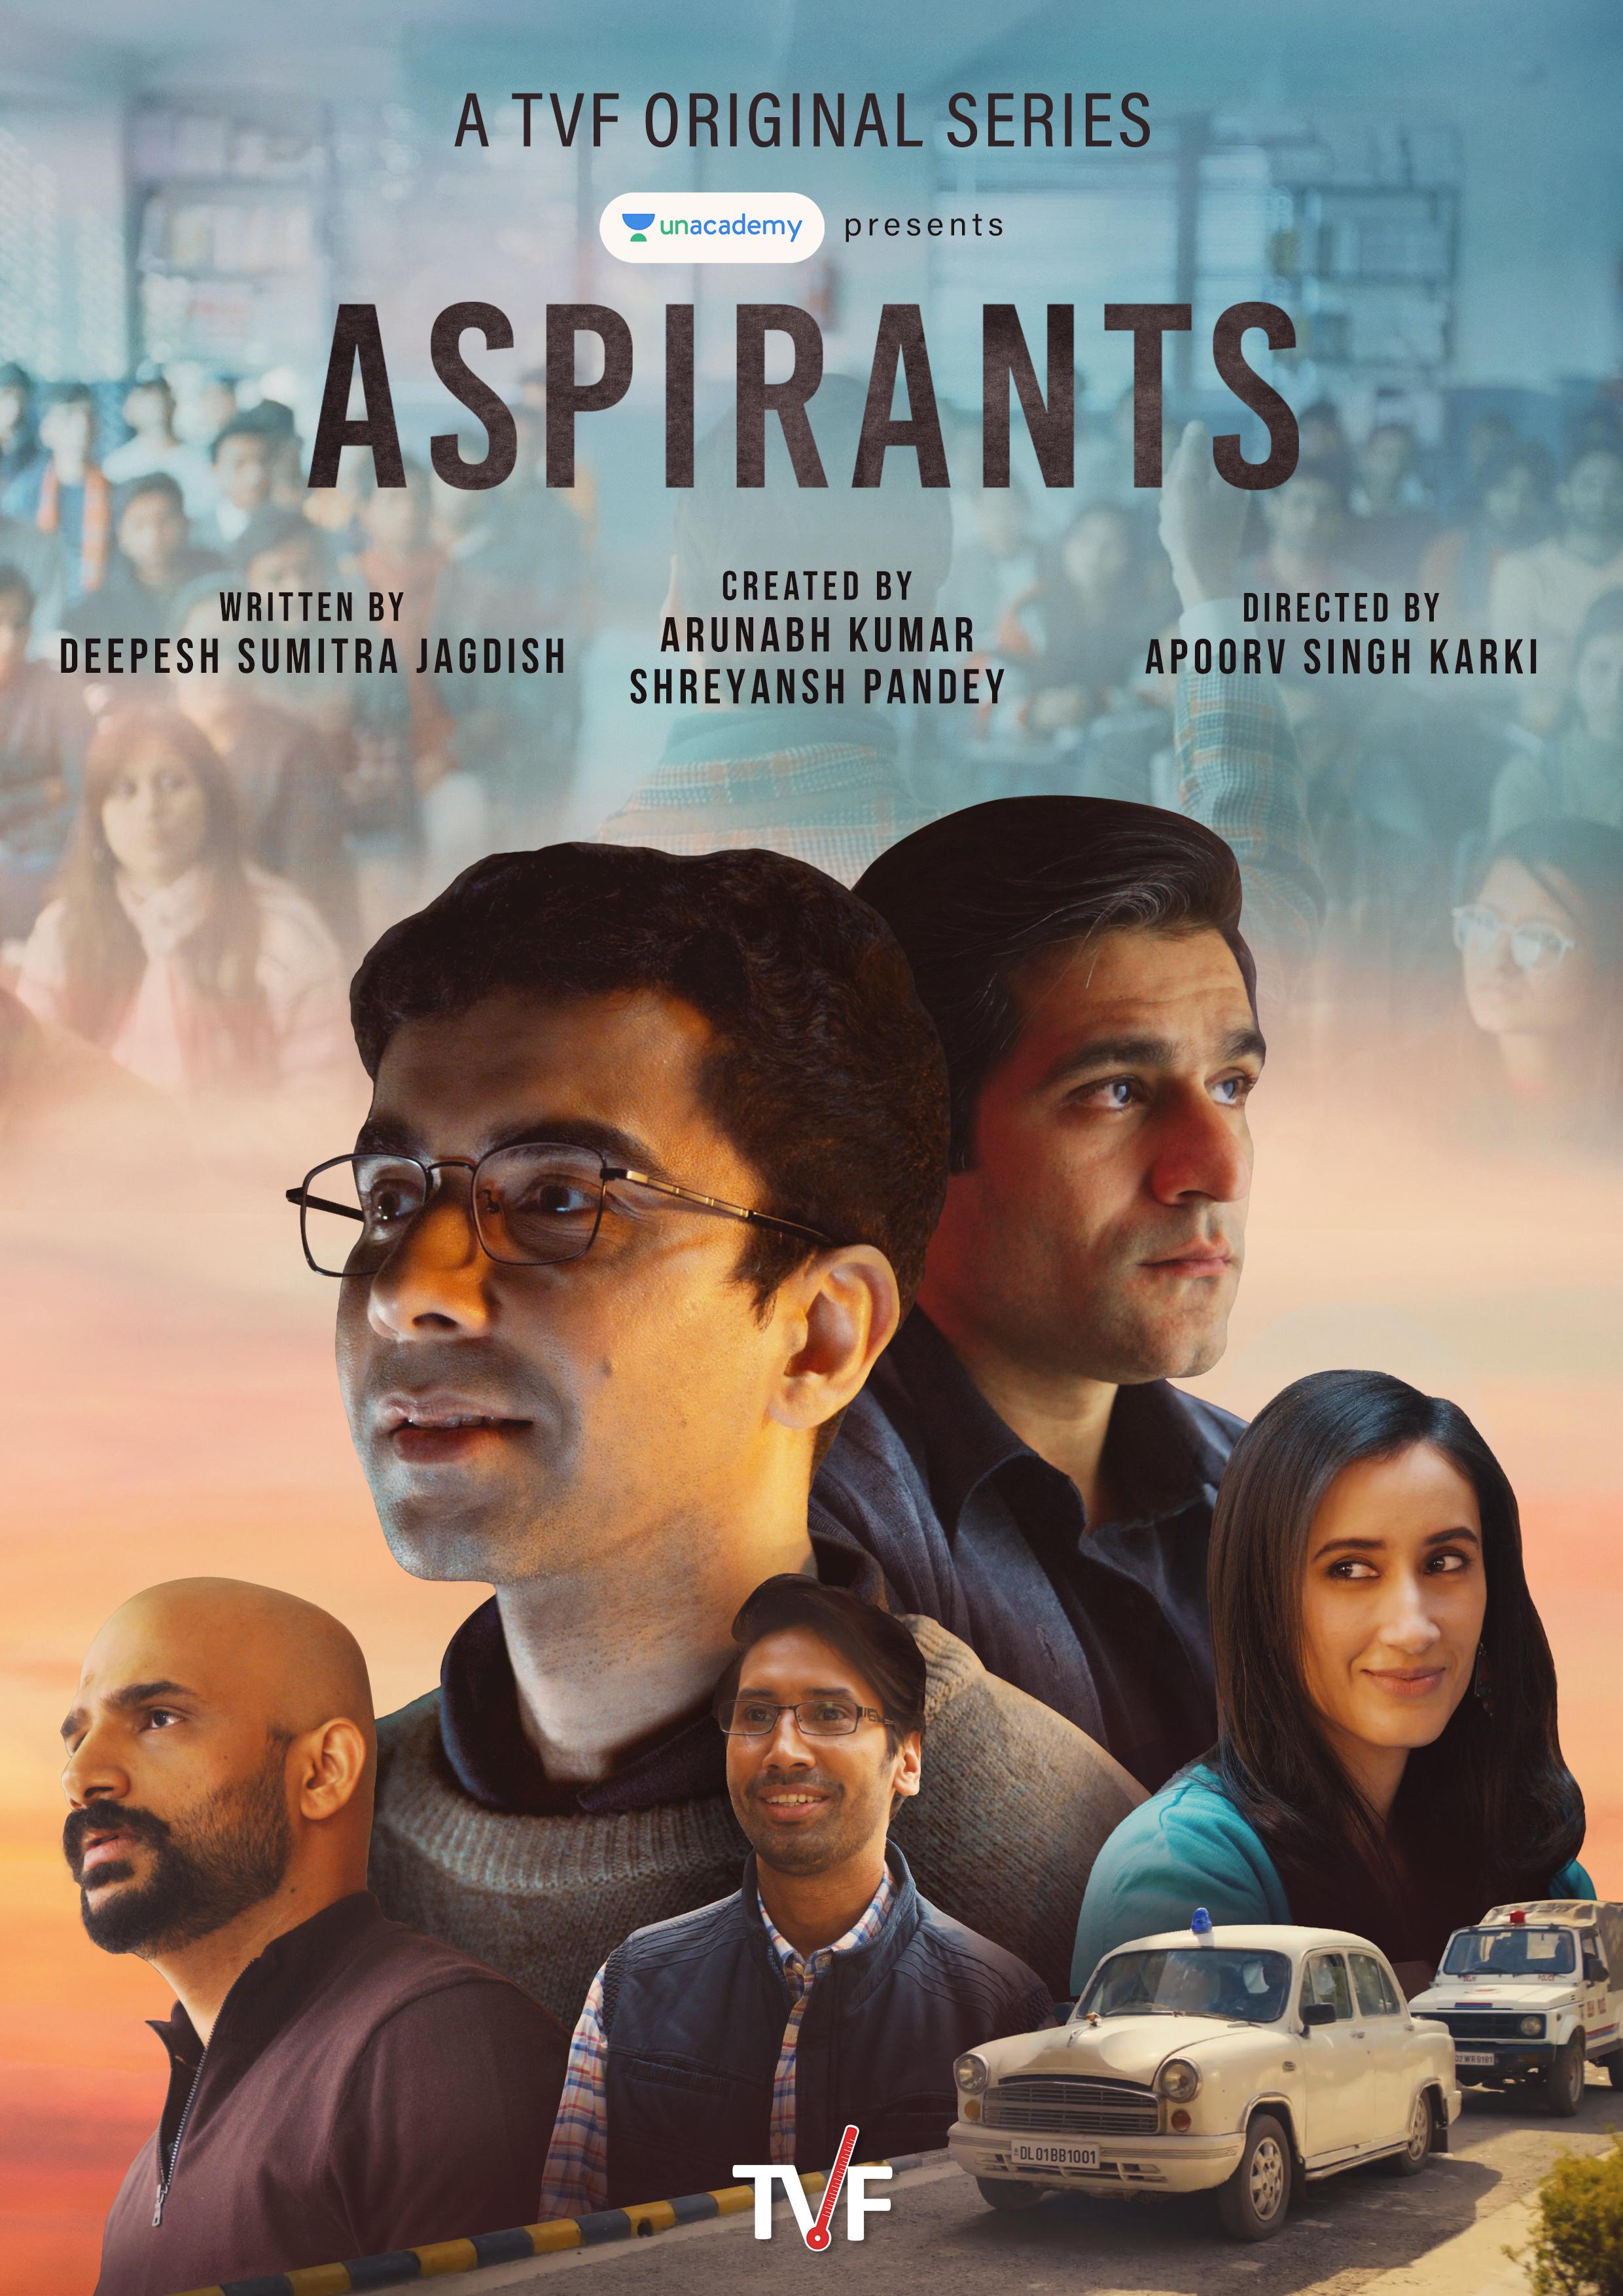 Aspirants Season 2 (October 25) -  Prime Video
For those who loved the first season, 